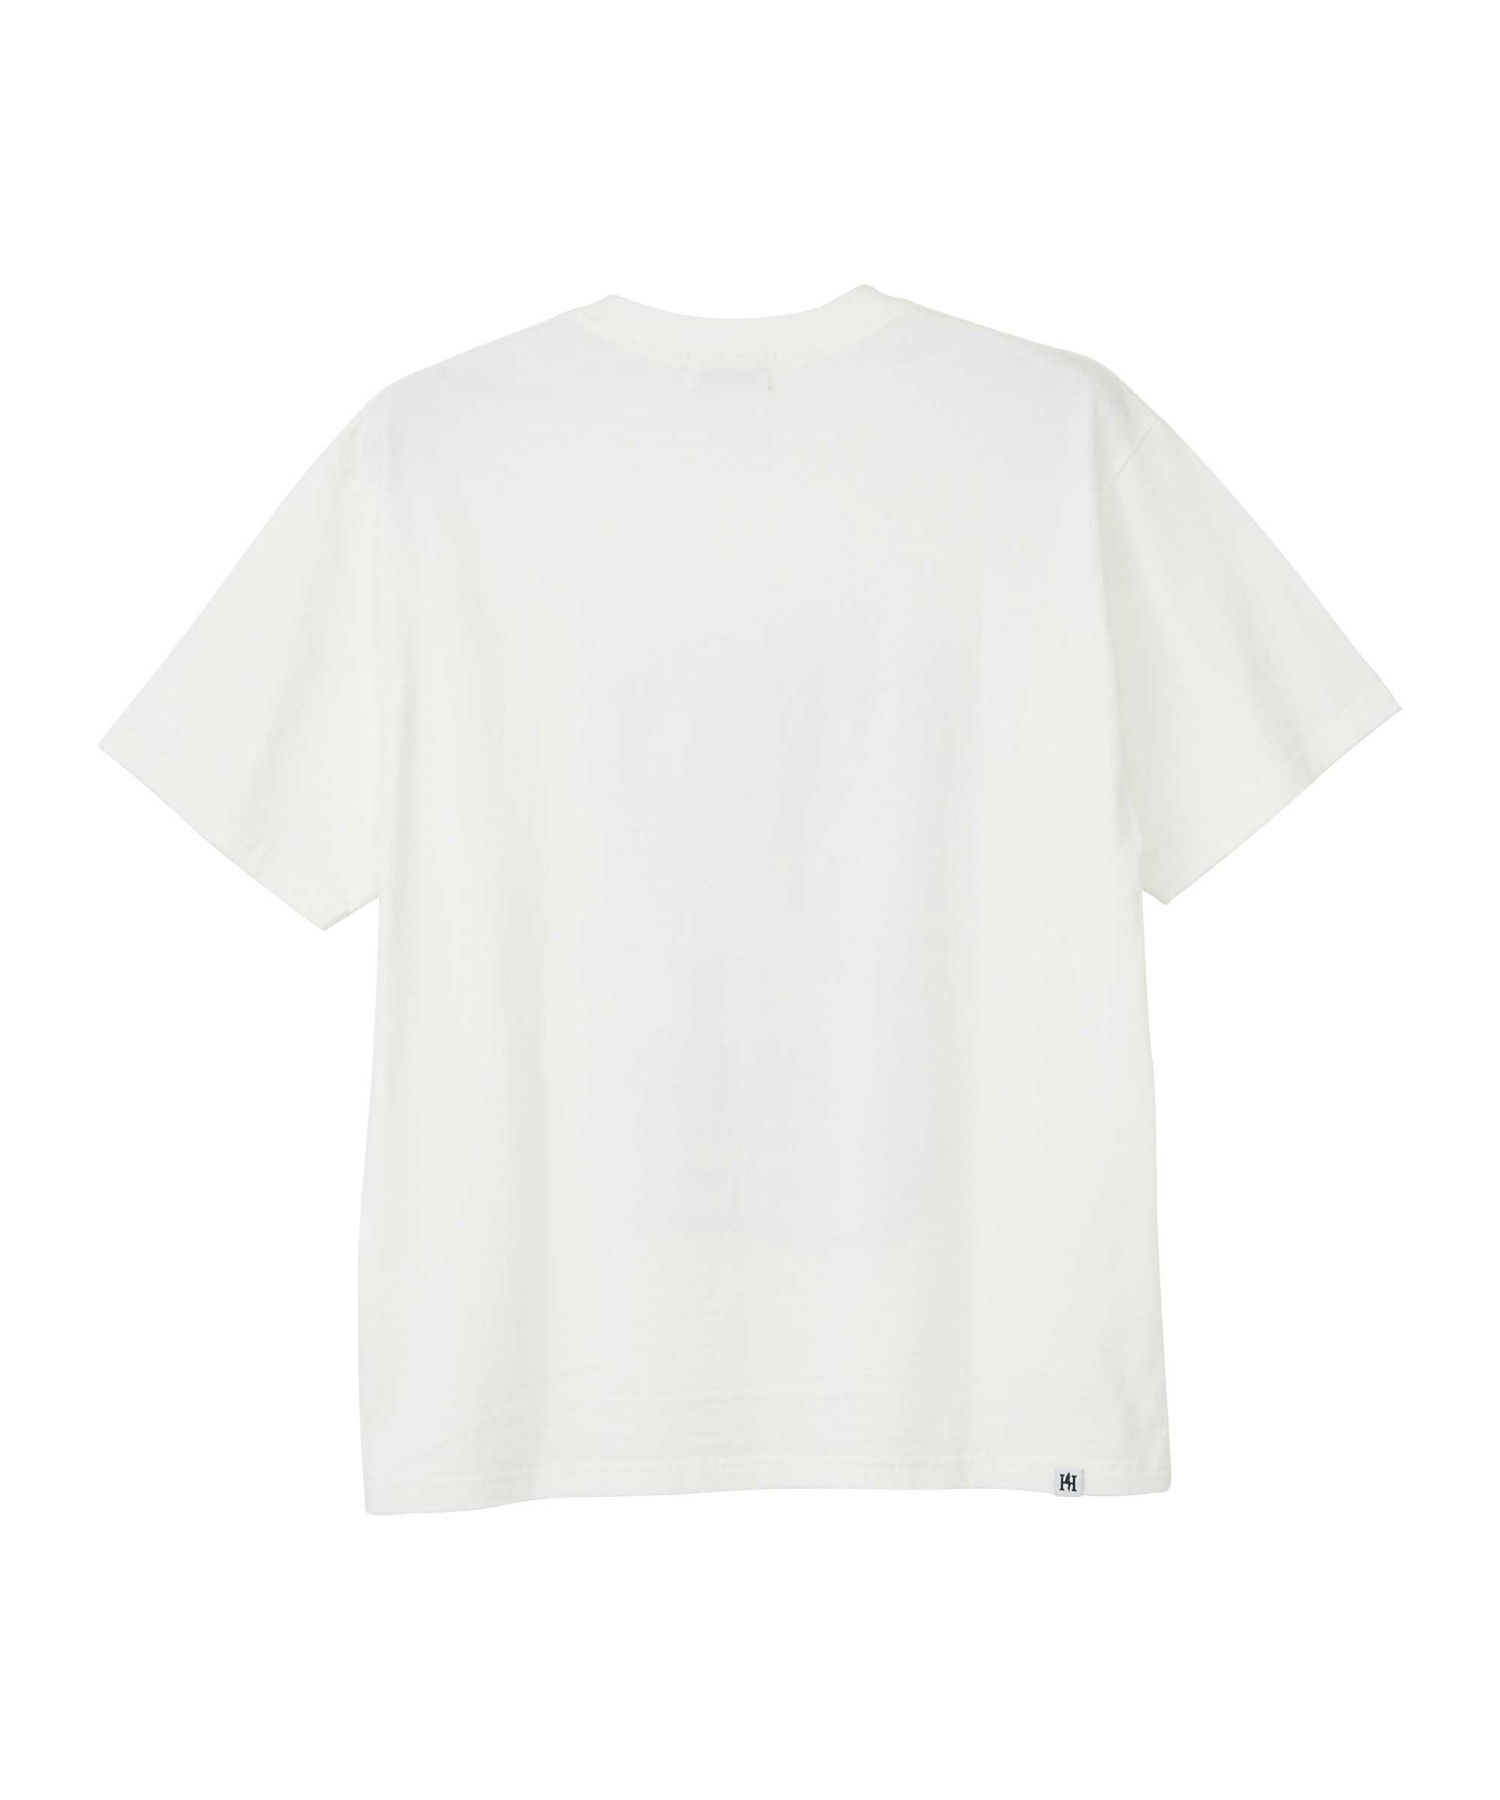 TAKE IT EASY Tシャツ HYSTERIC GLAMOUR MEN│HYSTERIC GLAMOUR ONLINE 